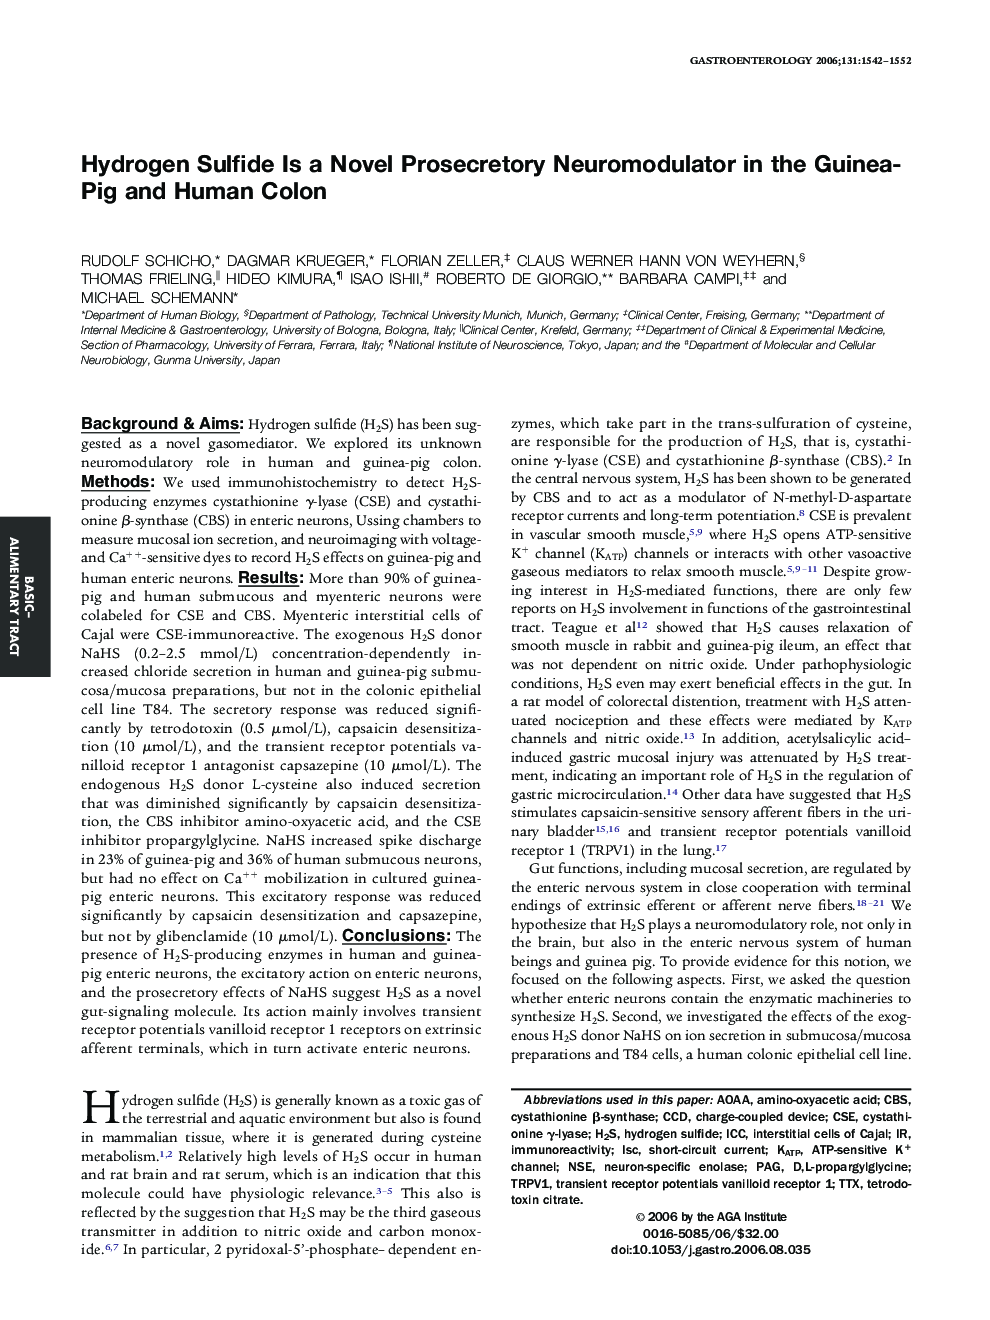 Hydrogen Sulfide Is a Novel Prosecretory Neuromodulator in the Guinea-Pig and Human Colon 